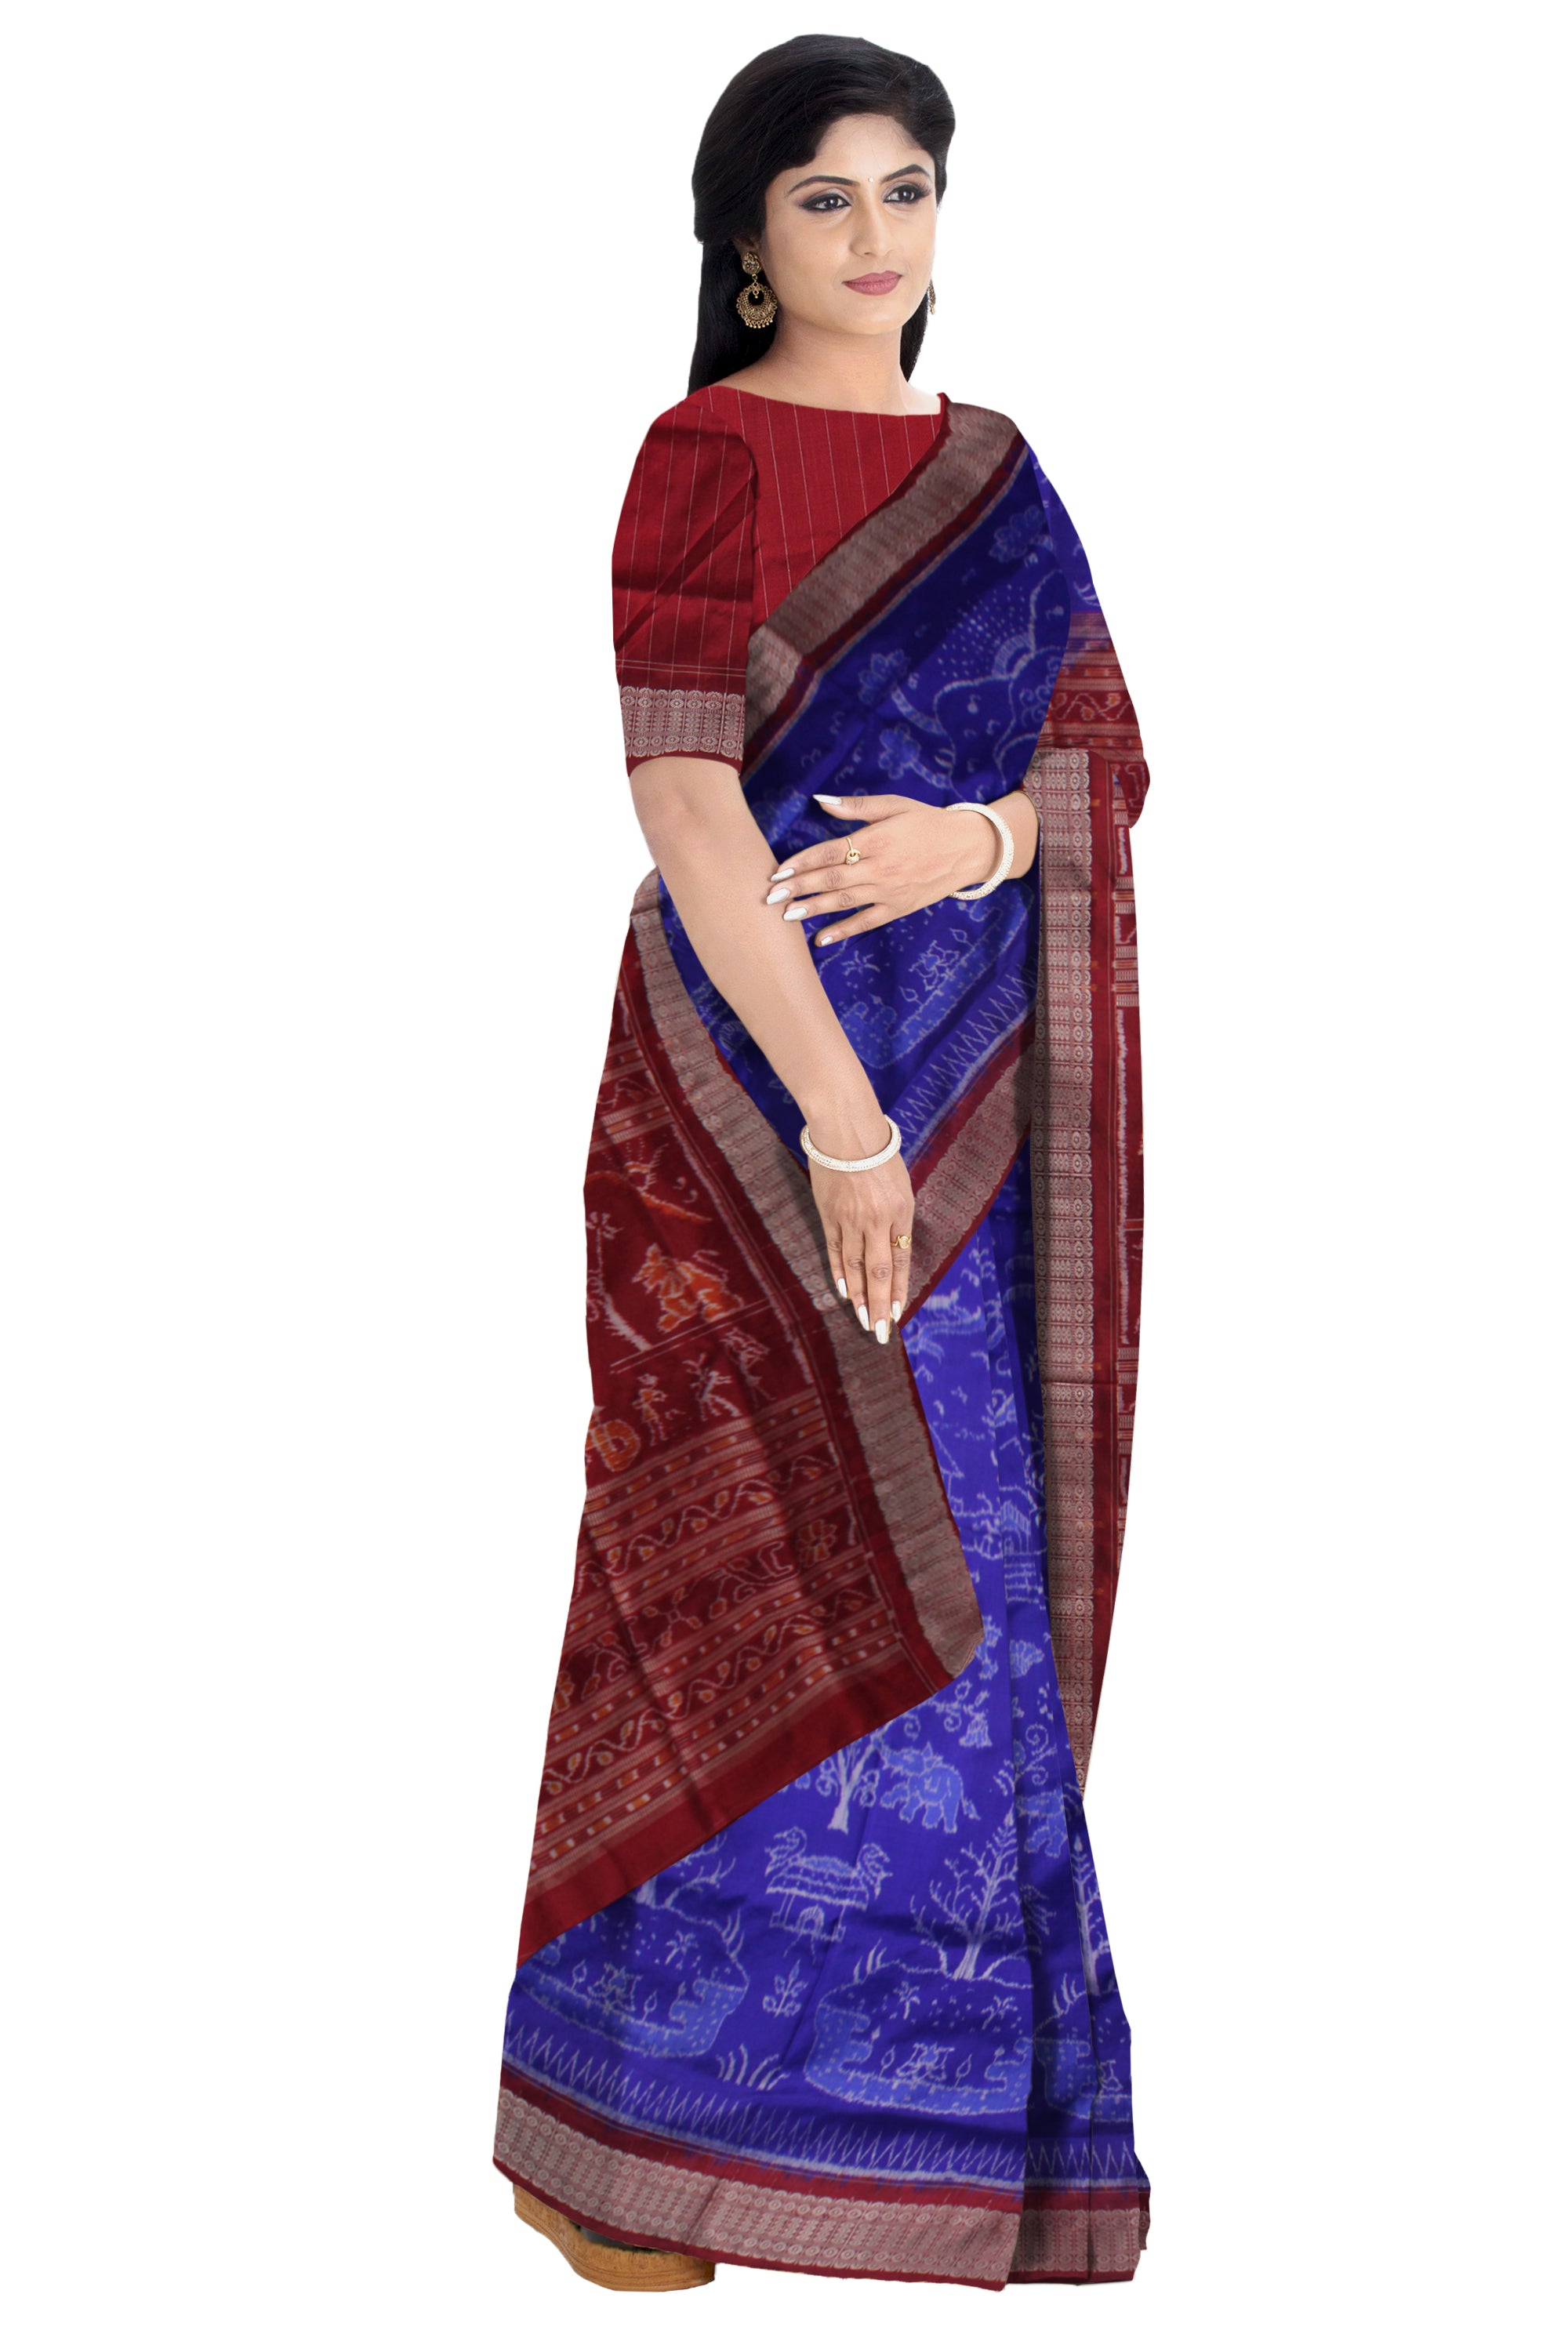 TRADITIONAL VILLAGE PATTERN PURE SILK SAREE IS BLUE AND MAROON COLOR BASE, WITH BLOUSE PIECE. - Koshali Arts & Crafts Enterprise